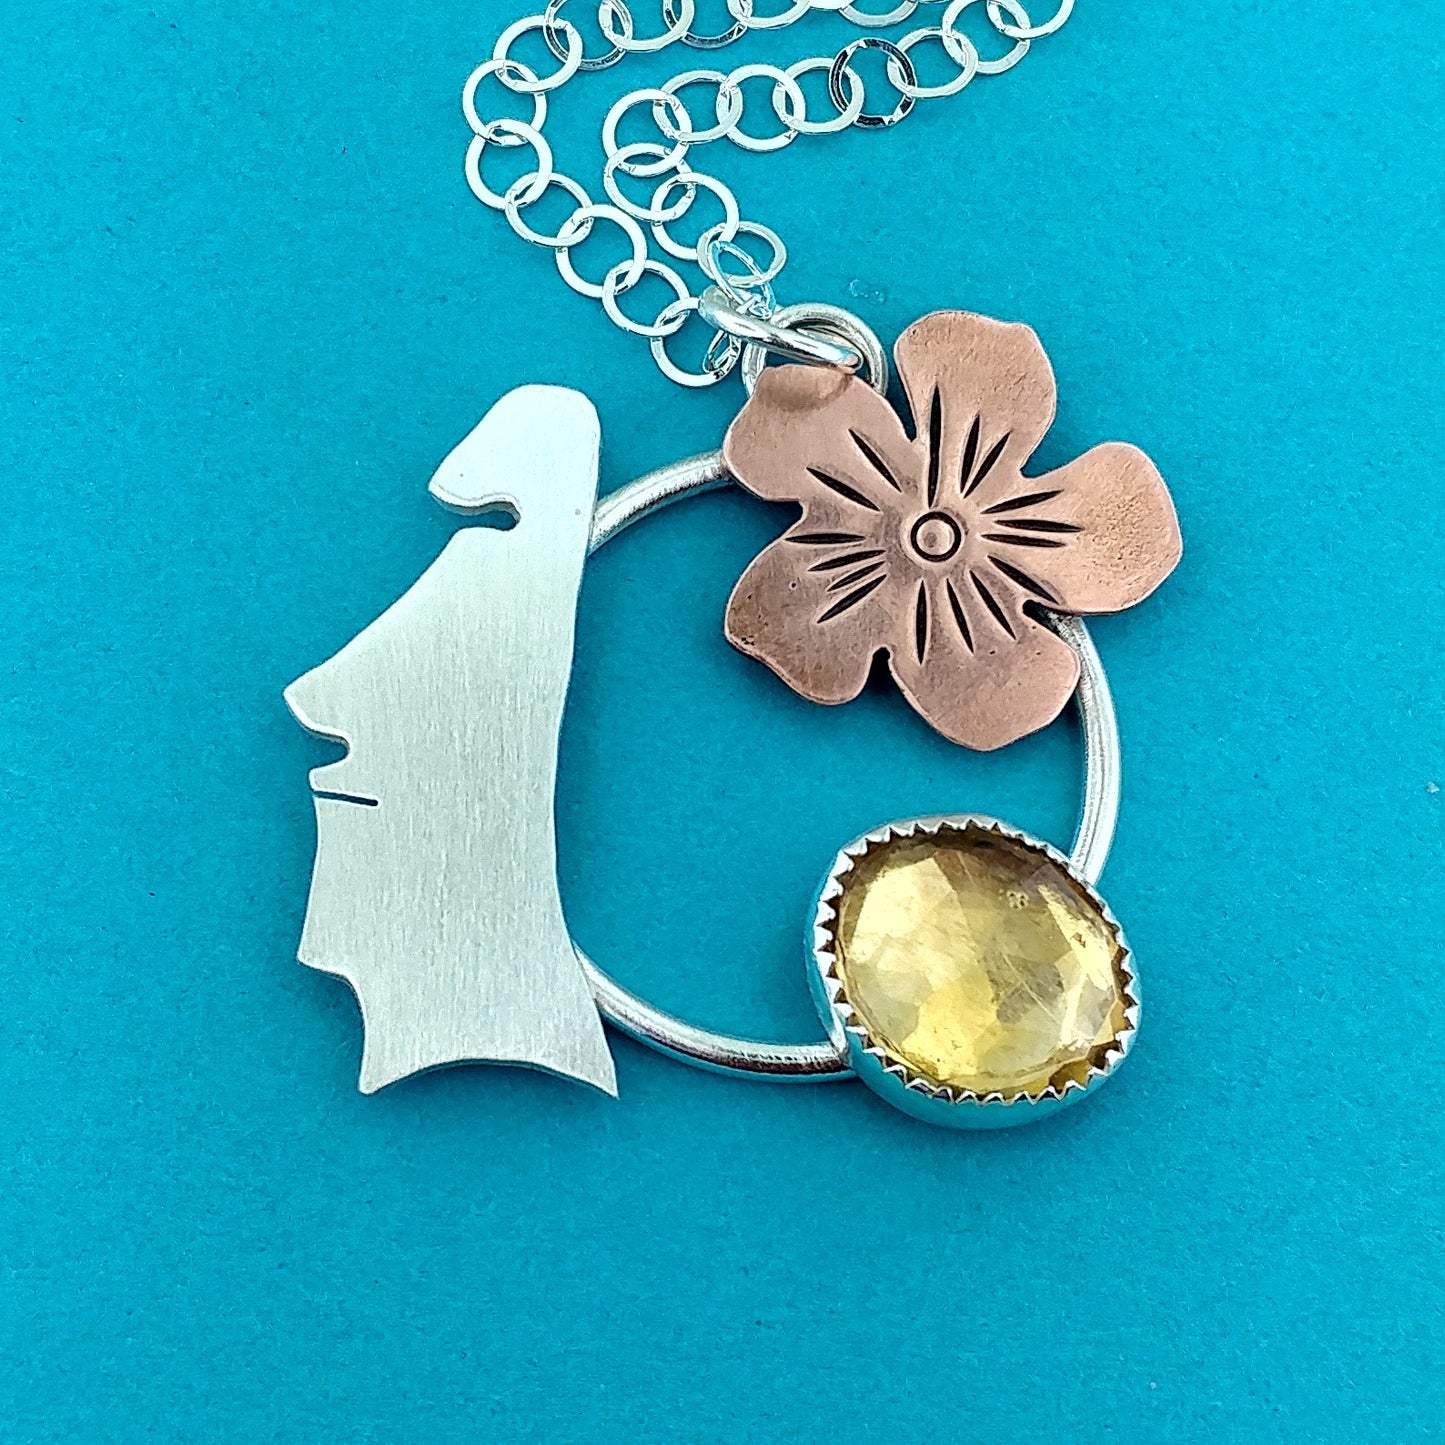 Moai Head with Flowers Necklace and Citrine